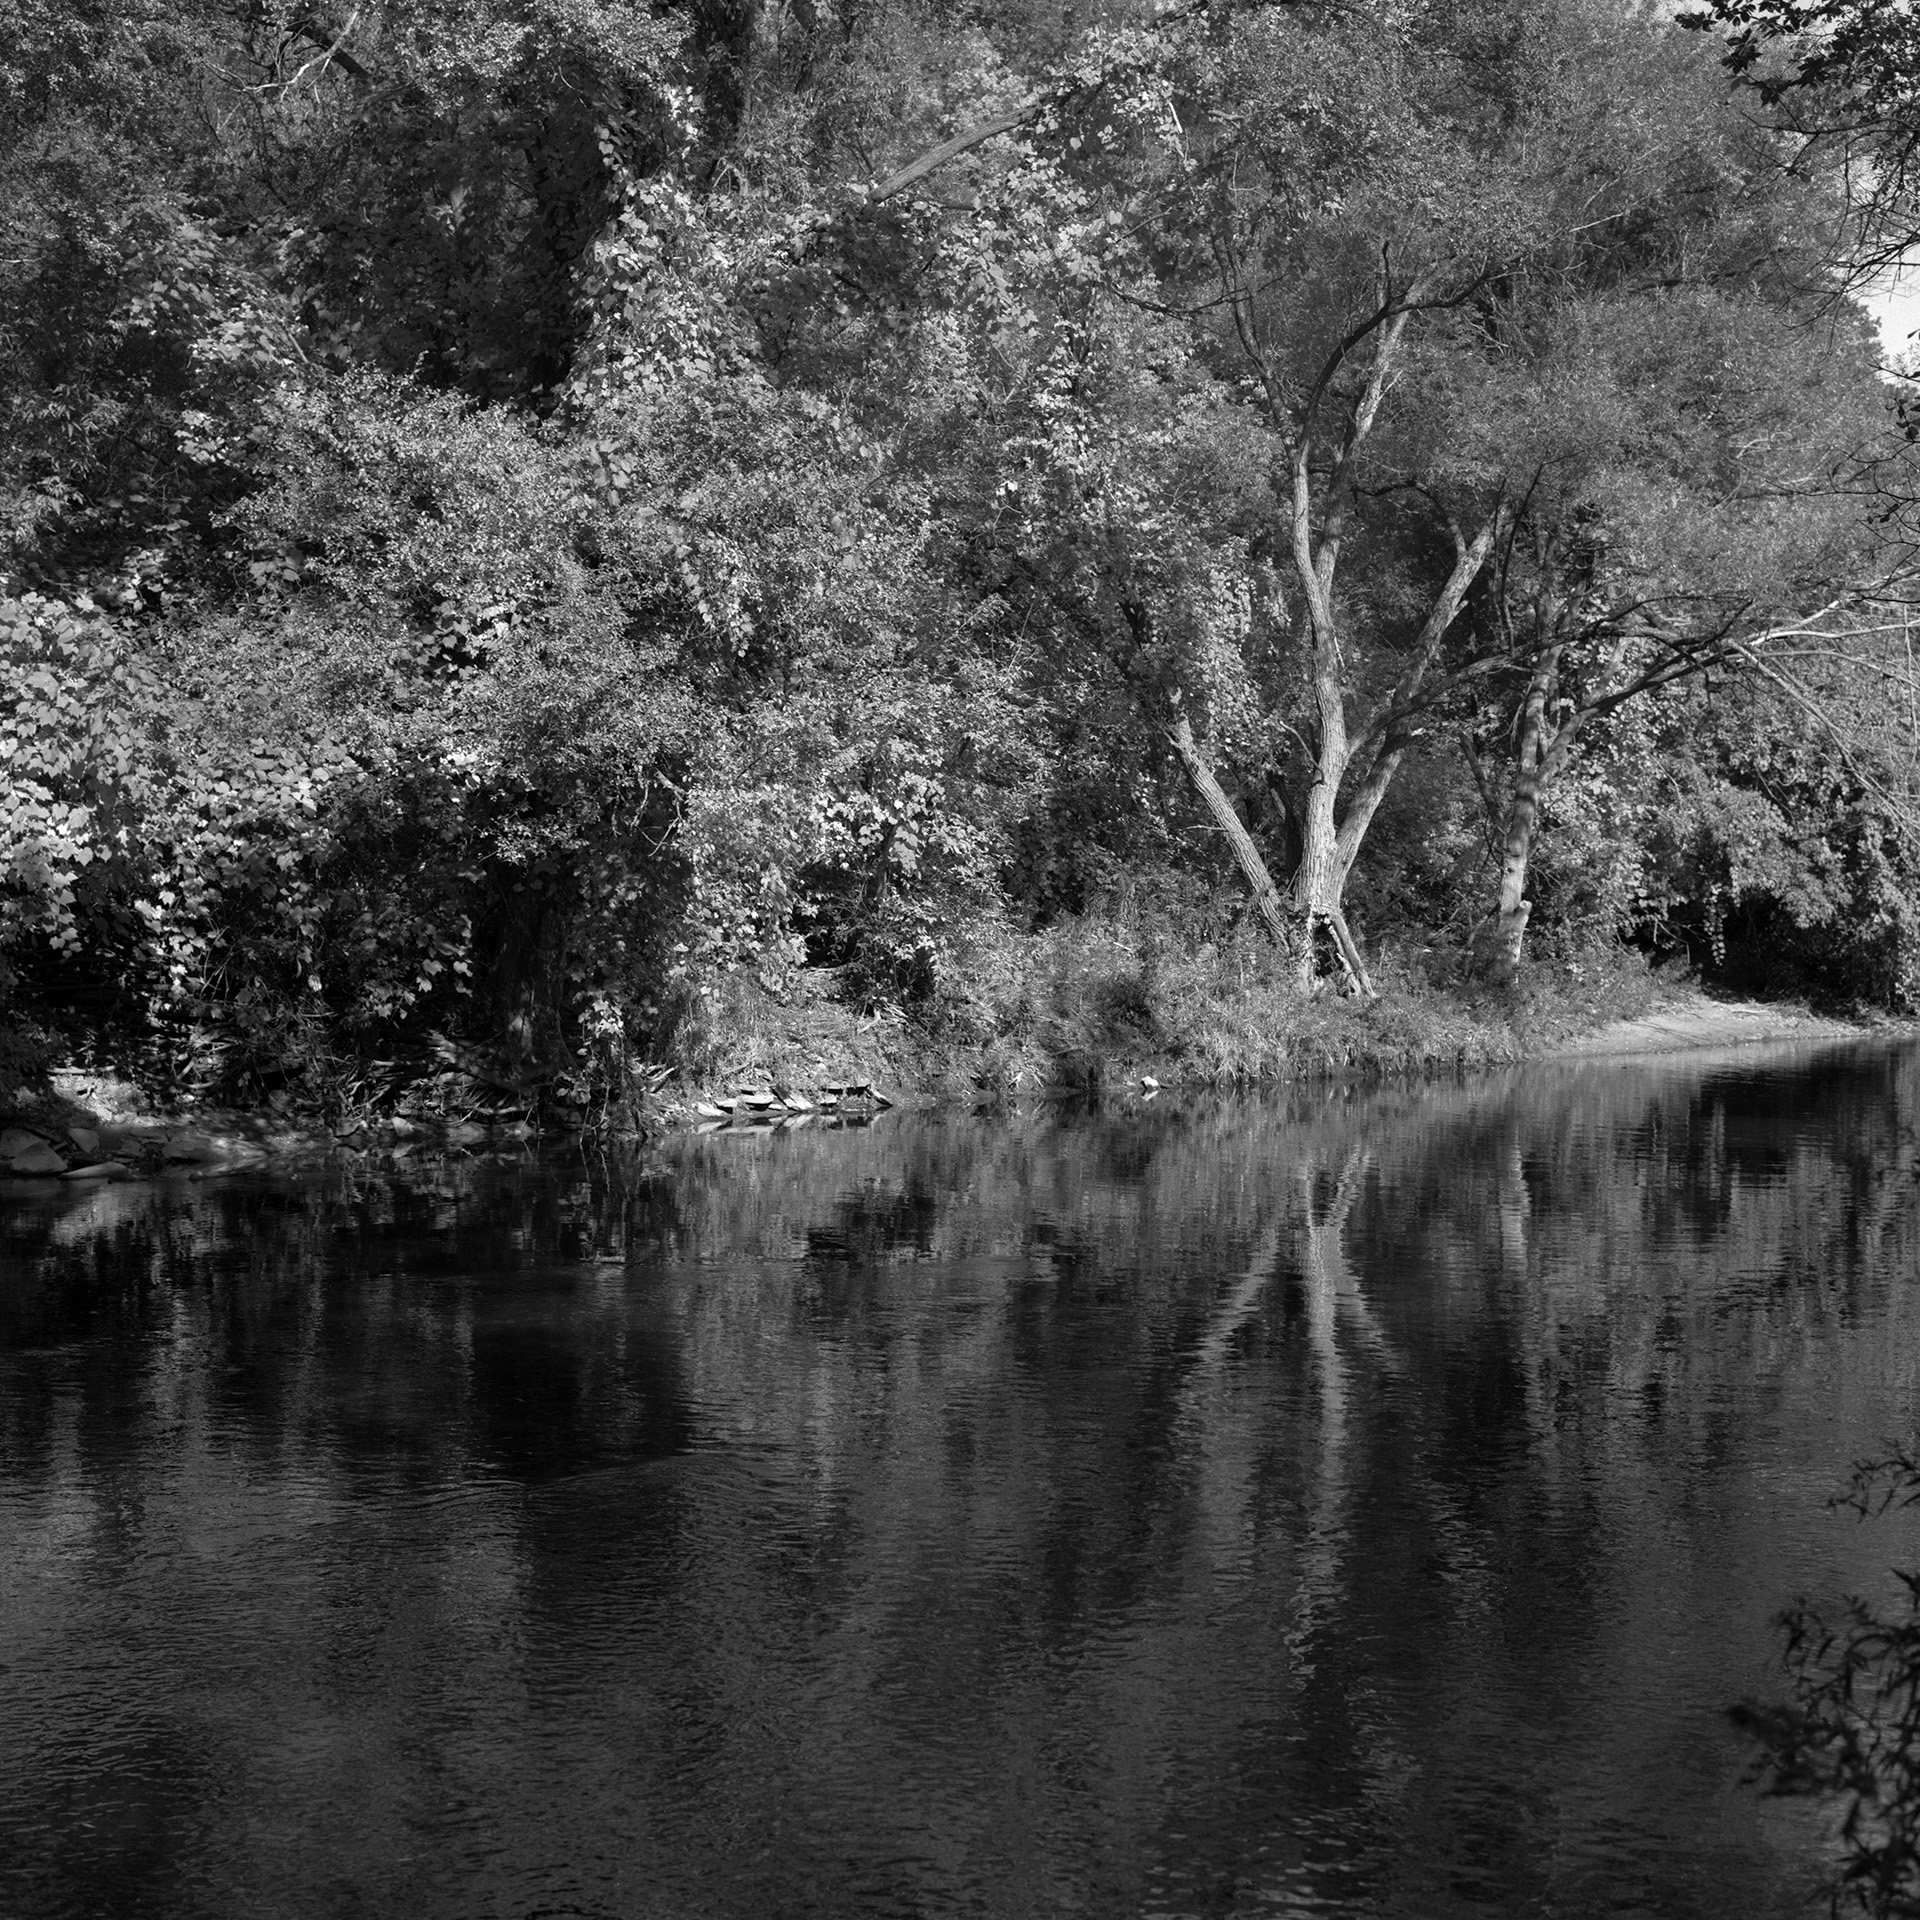 Where The River Runs # 6: A square black and white photograph of a riverside. Water cuts through the foreground as large mature trees behind cast their reflection down onto the water.